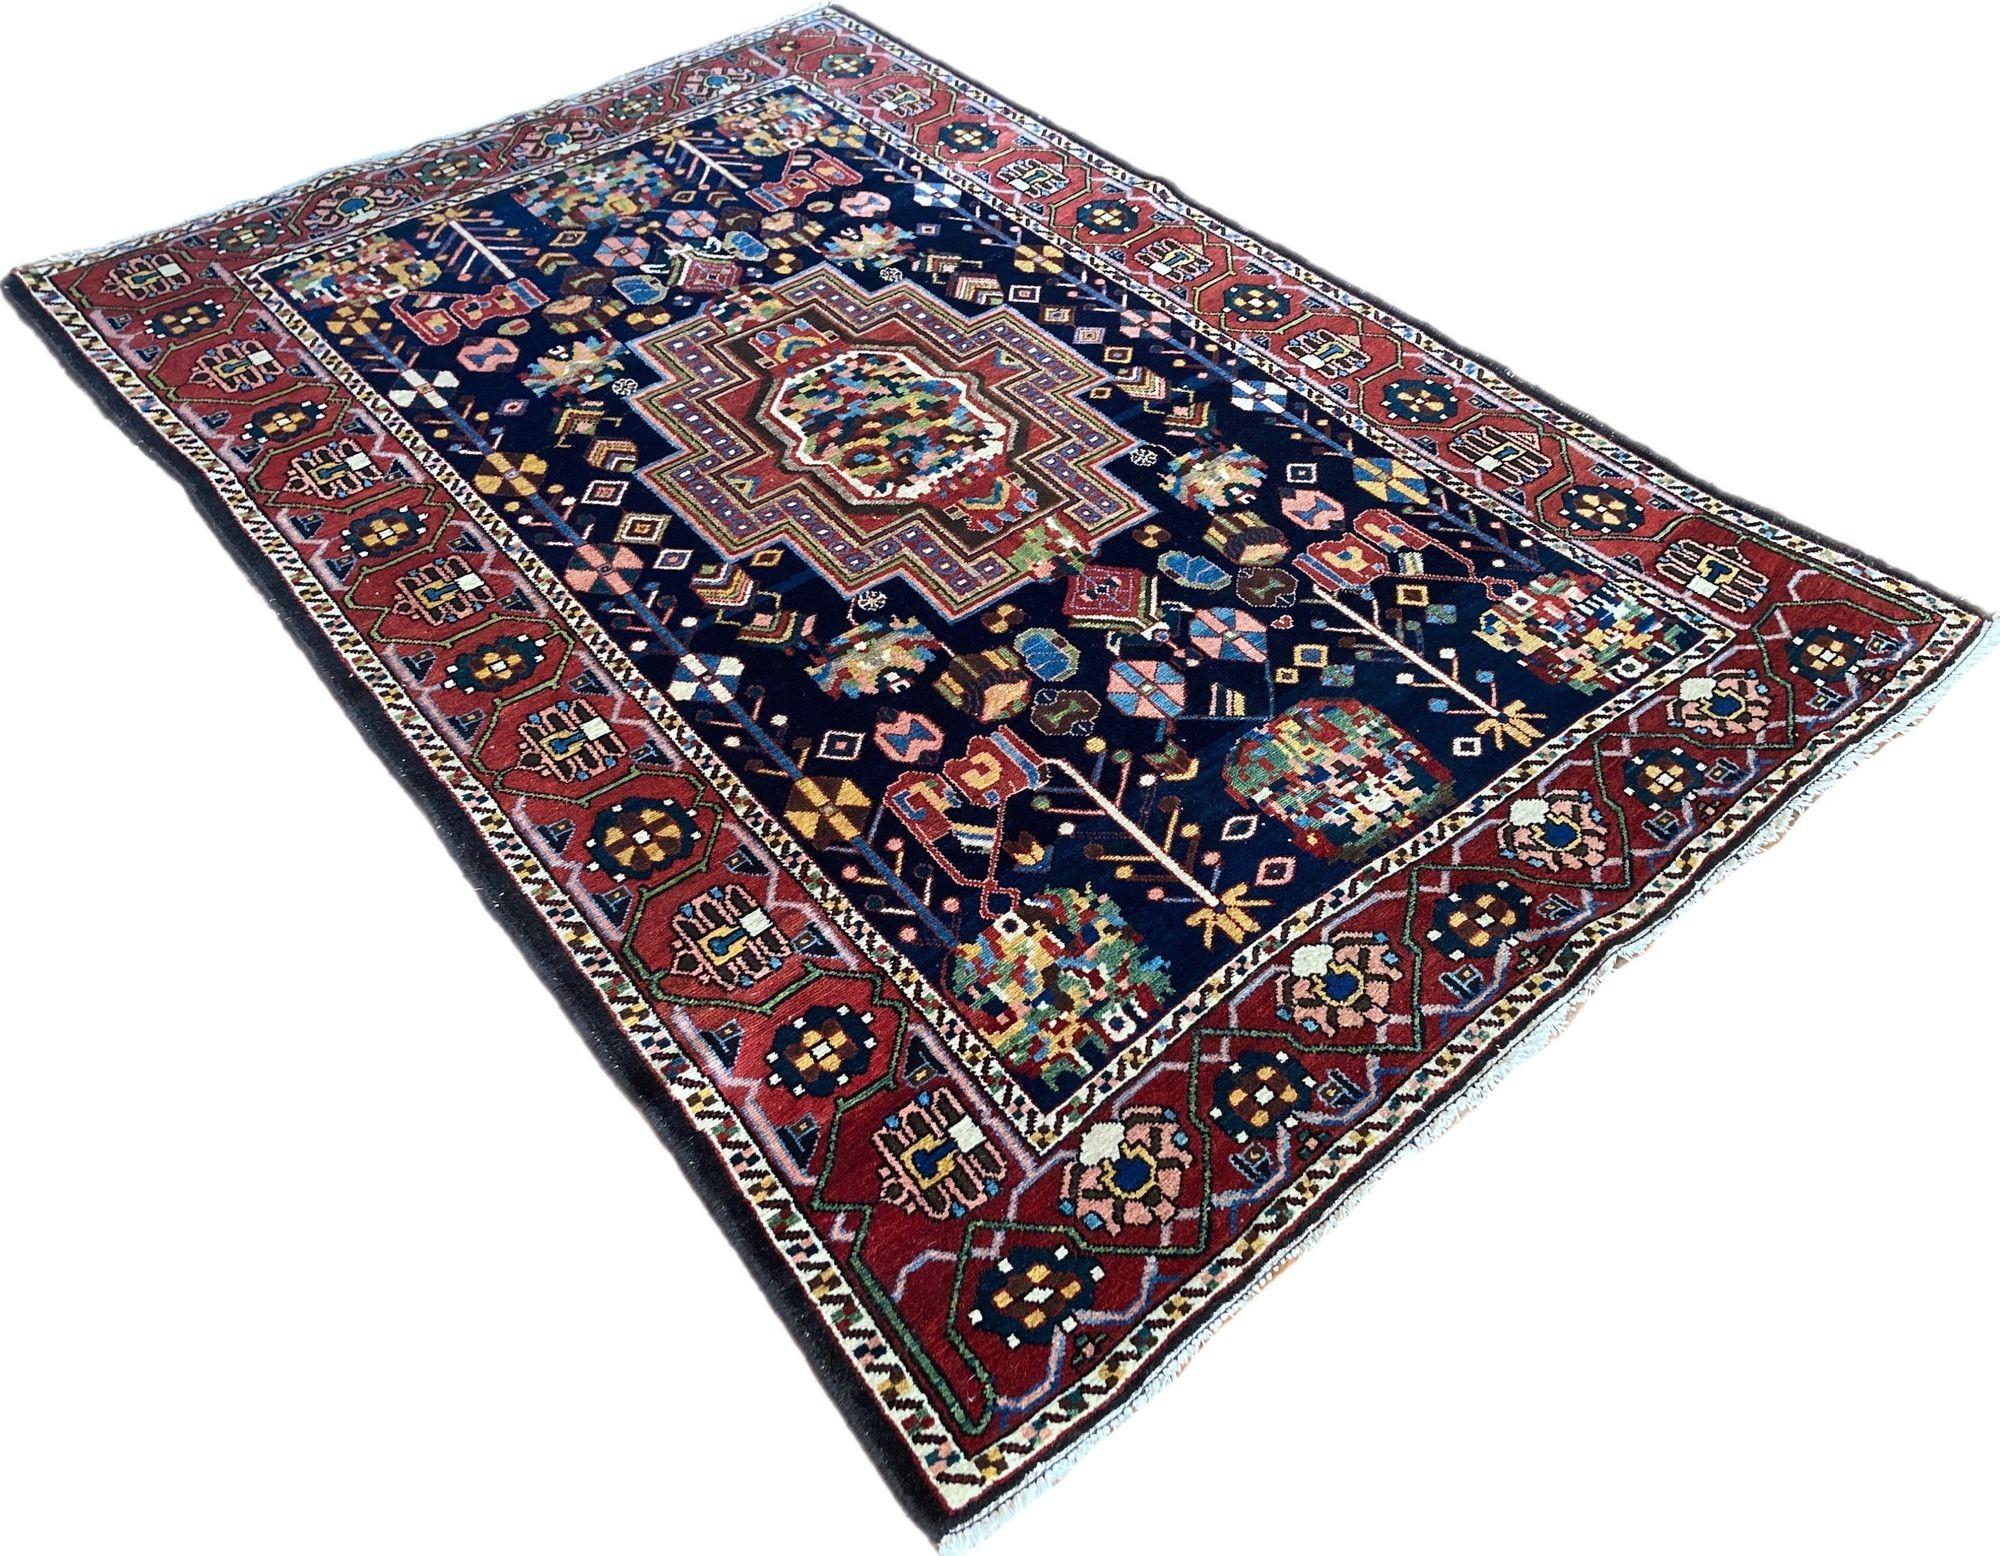 Antique Bakhtiar Rug 2.06m x 1.41m In Good Condition For Sale In St. Albans, GB